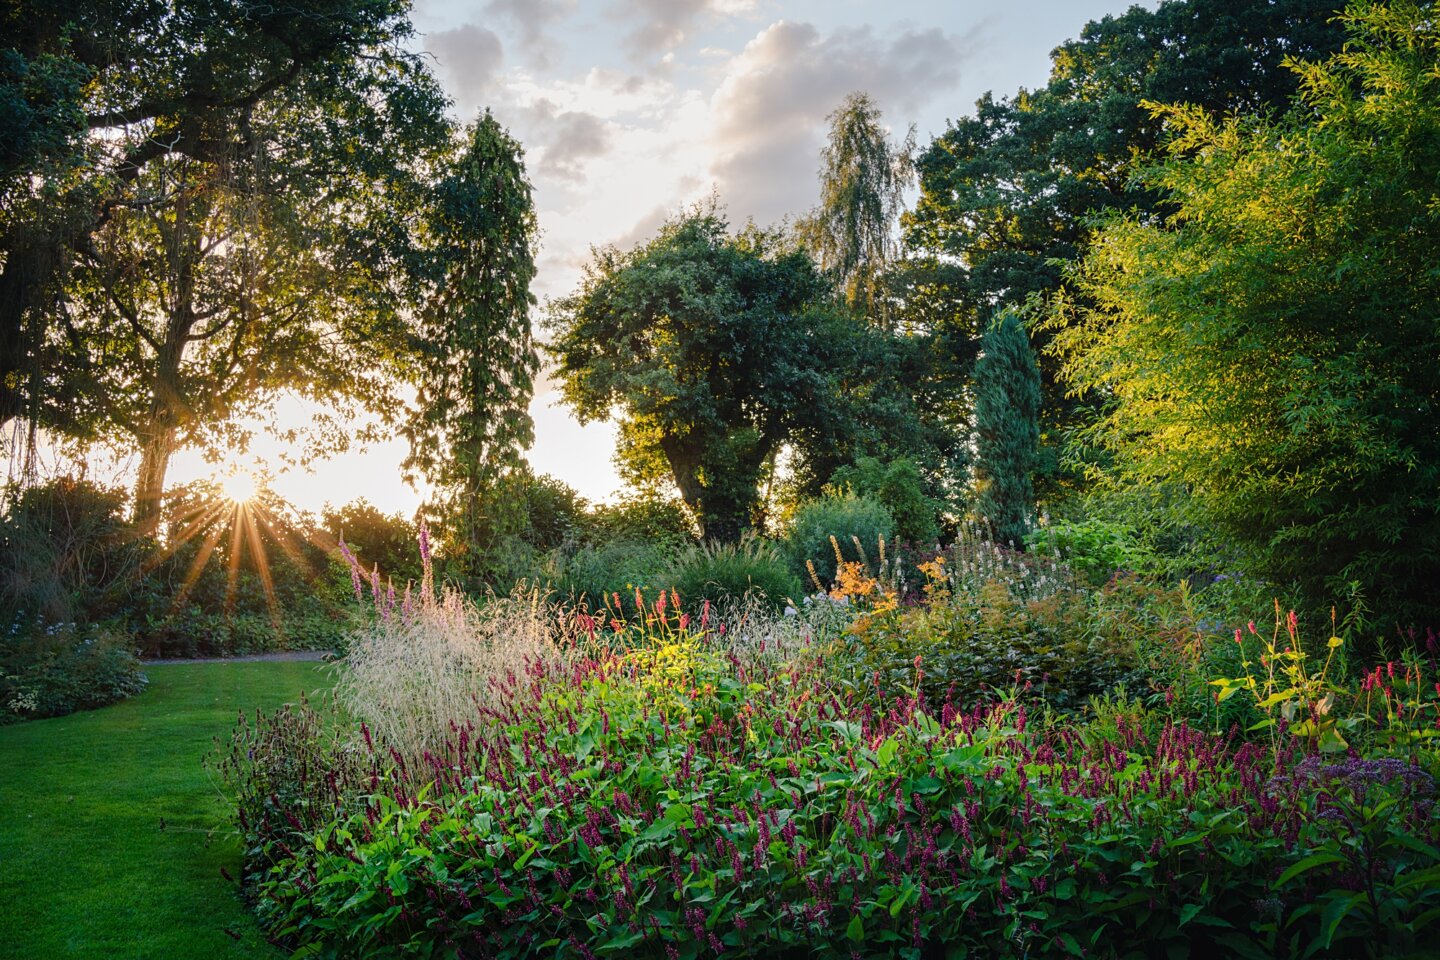 Sunset over Persicaria and autumn perennials at the Beth Chatto gardens